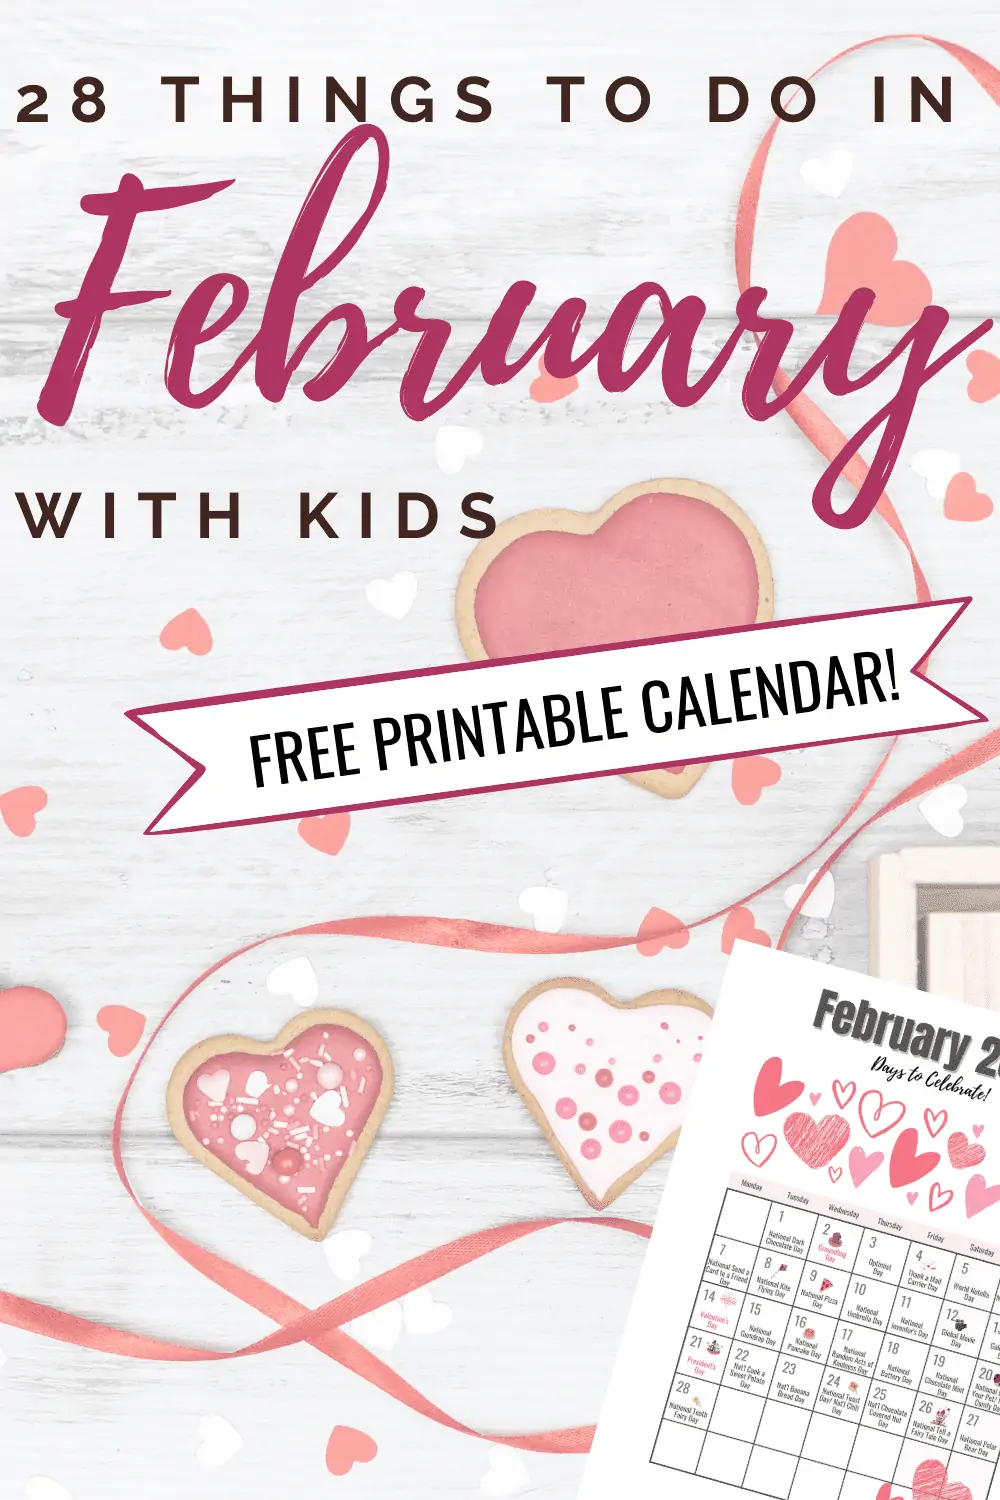 The Best National Days in February You'll Want to Enjoy With Your Kids